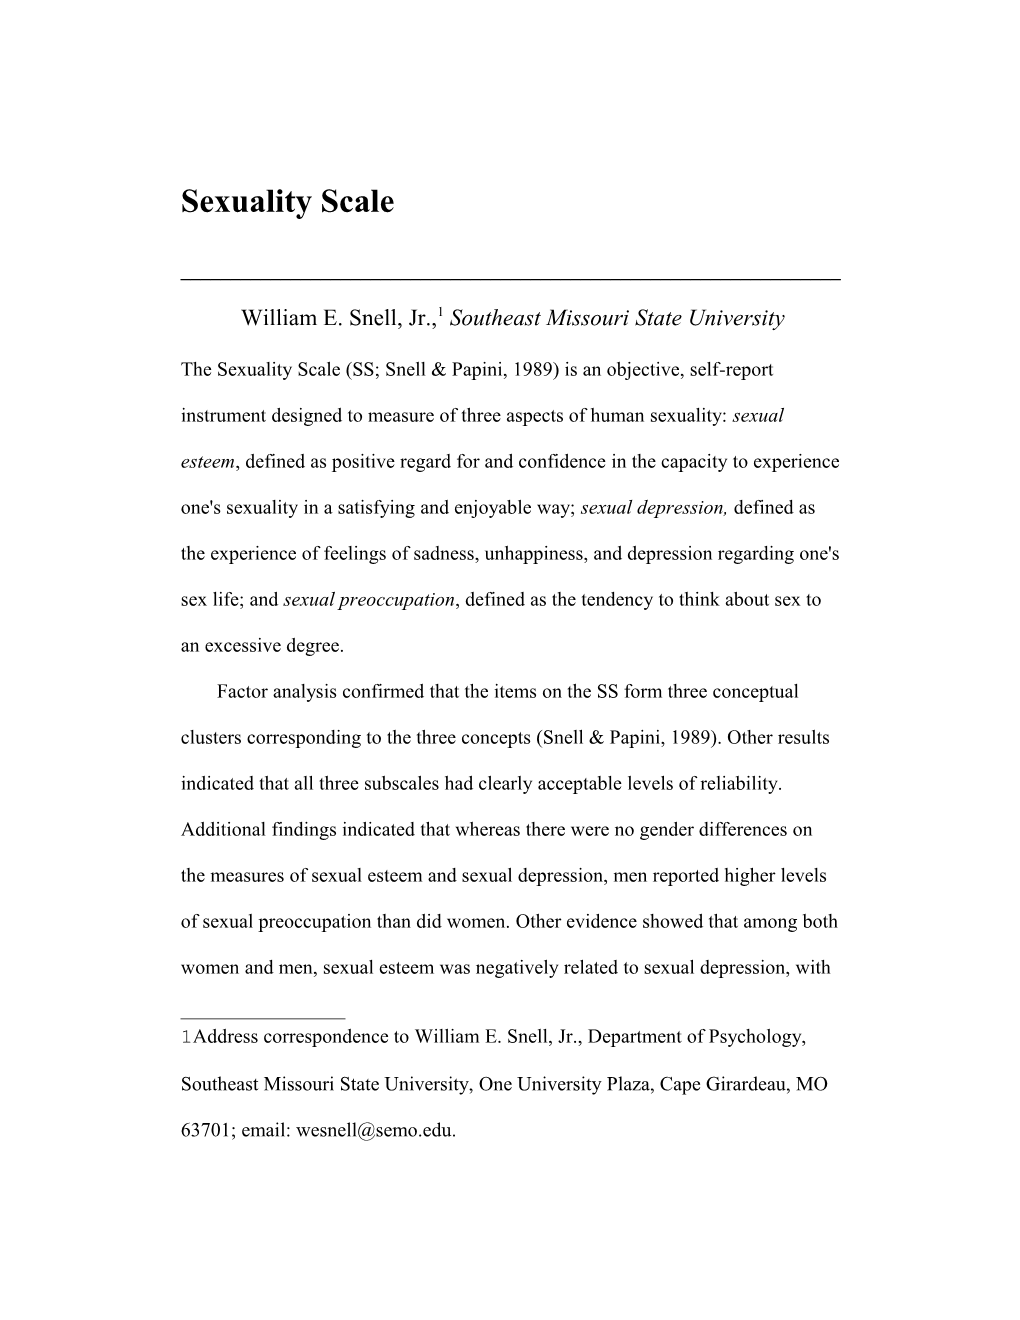 The Sexuality Scale